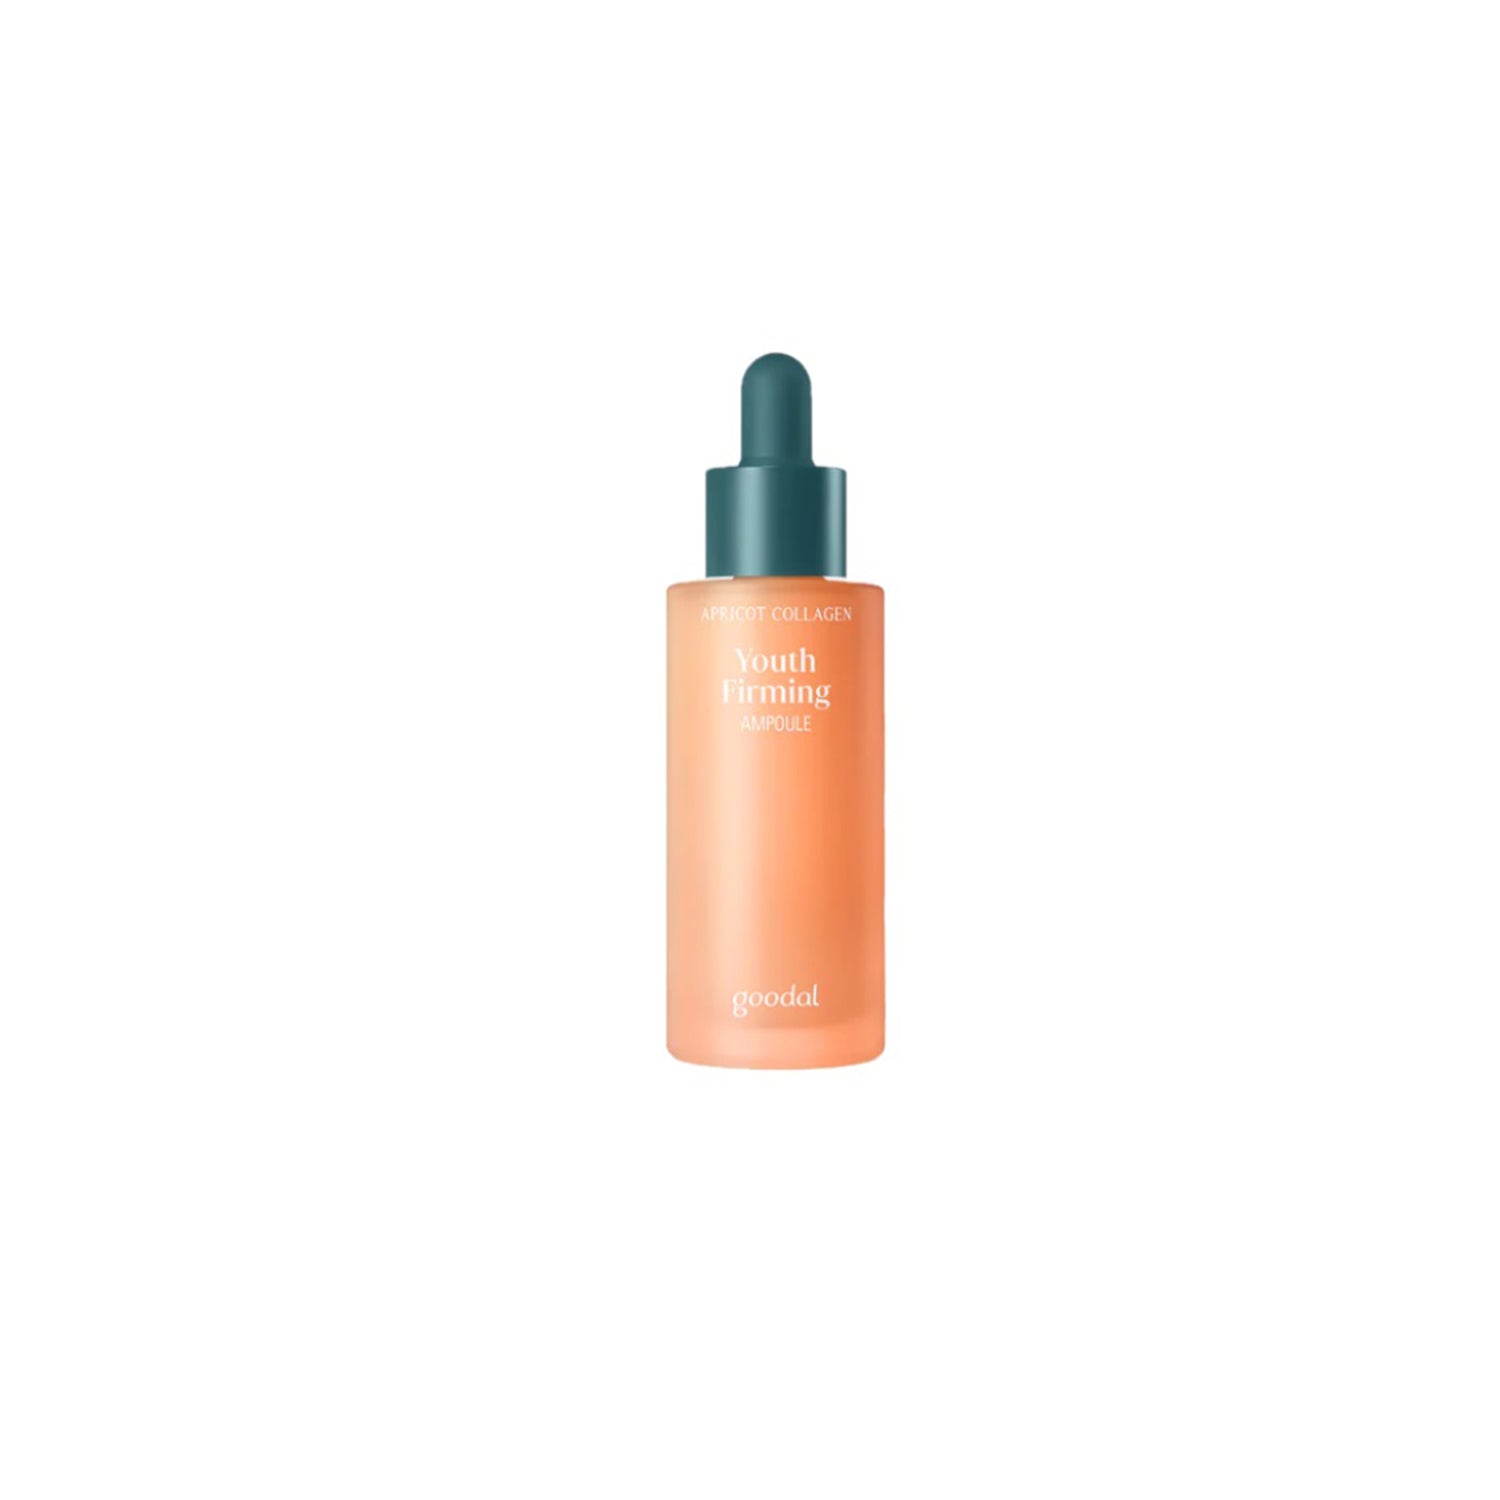 Apricot Collagen Youth Firming Ampoule